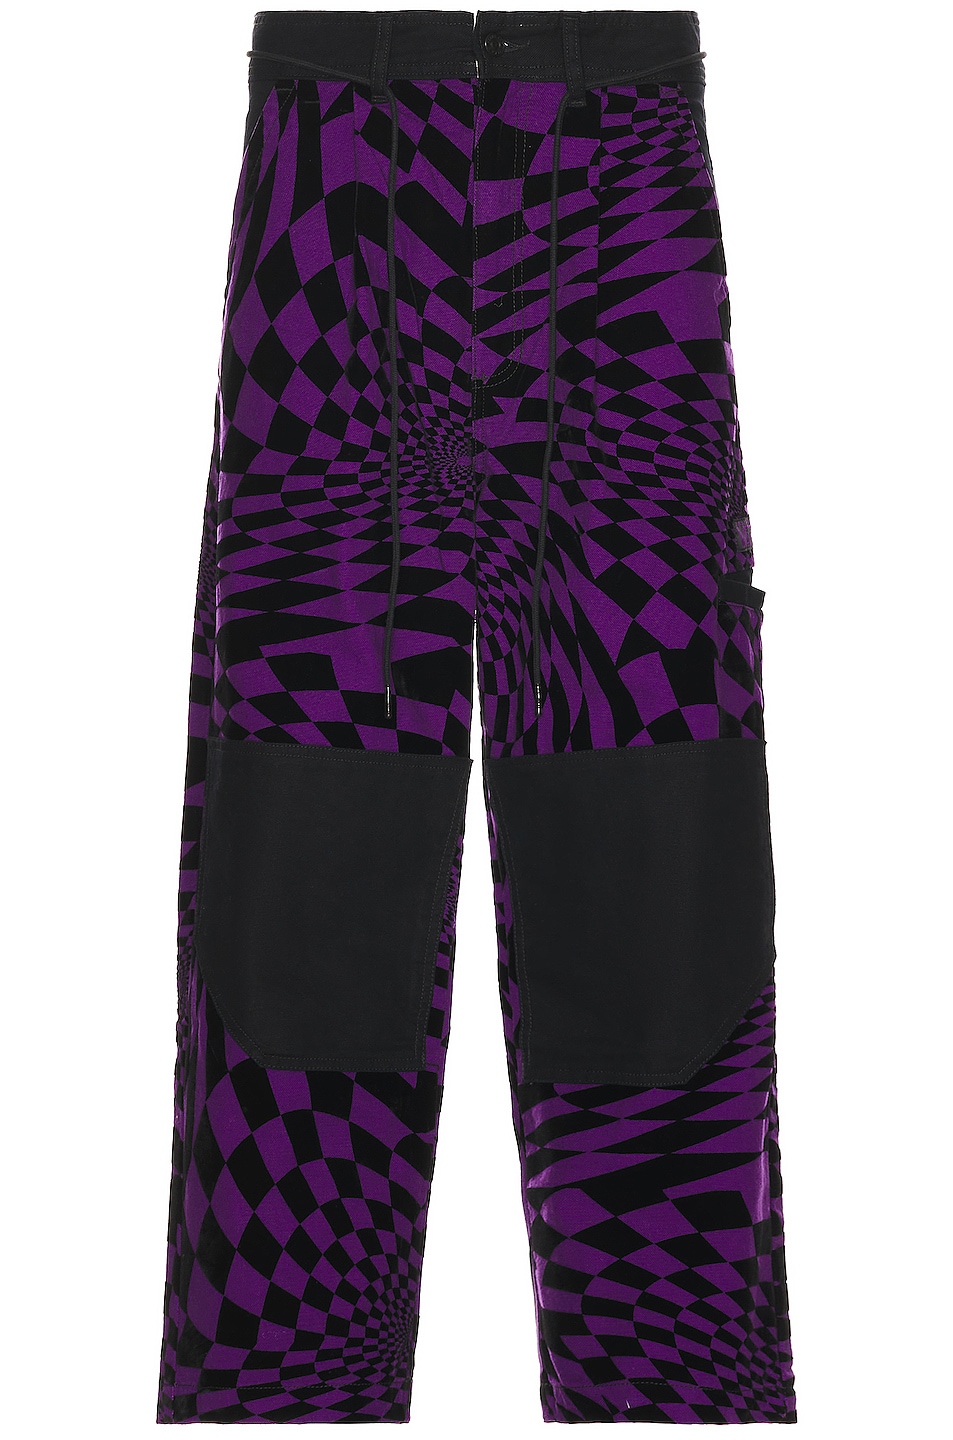 Image 1 of Vans Vault X P.A.M Spiral Checker Cargo Pant in 